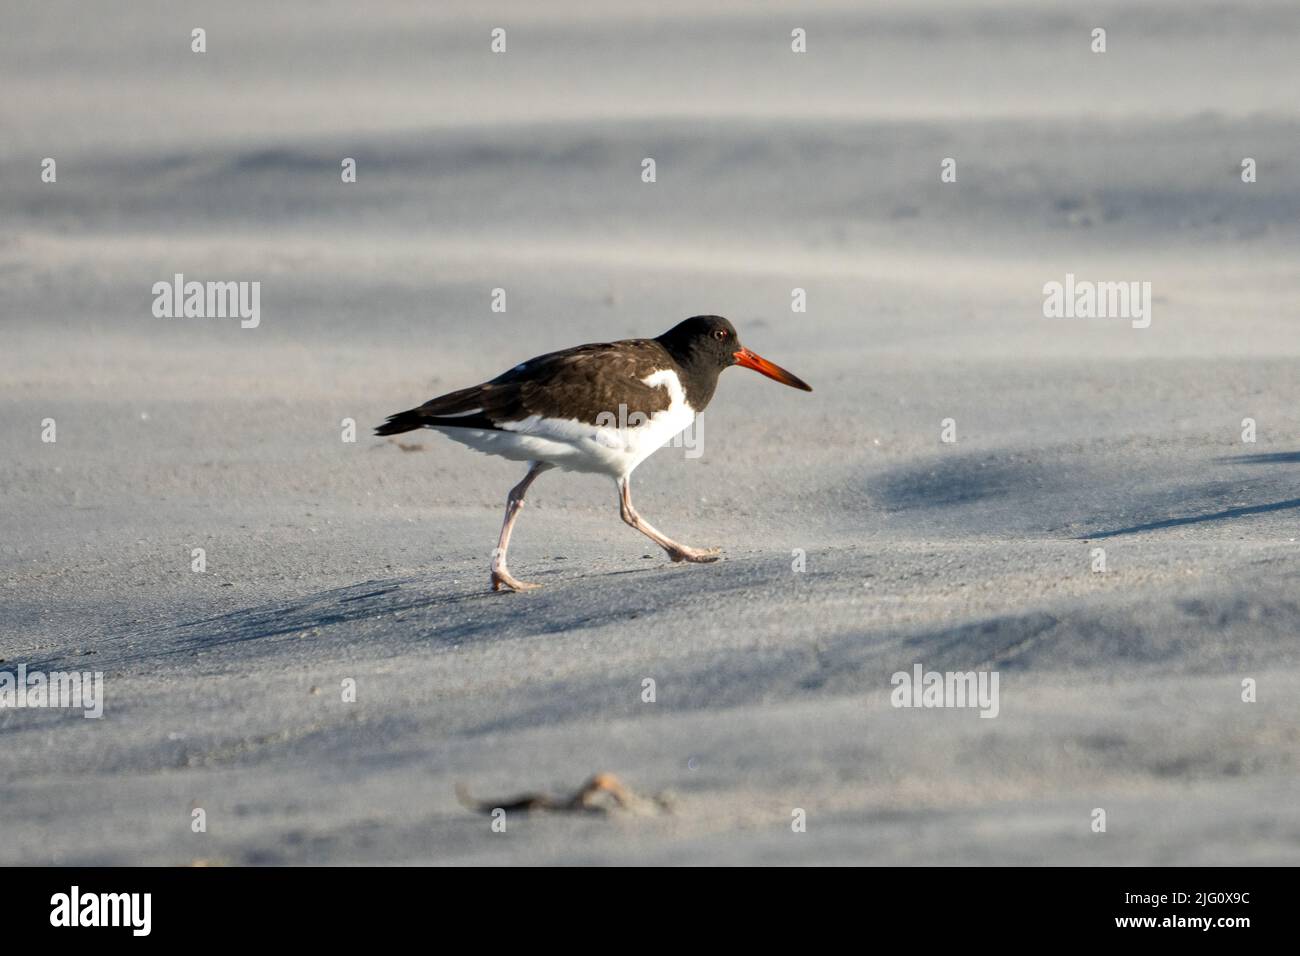 An American Oystercatcher, Haematopus palliatus, on the beach at Pan de Azucar National Park in northern Chile. Stock Photo